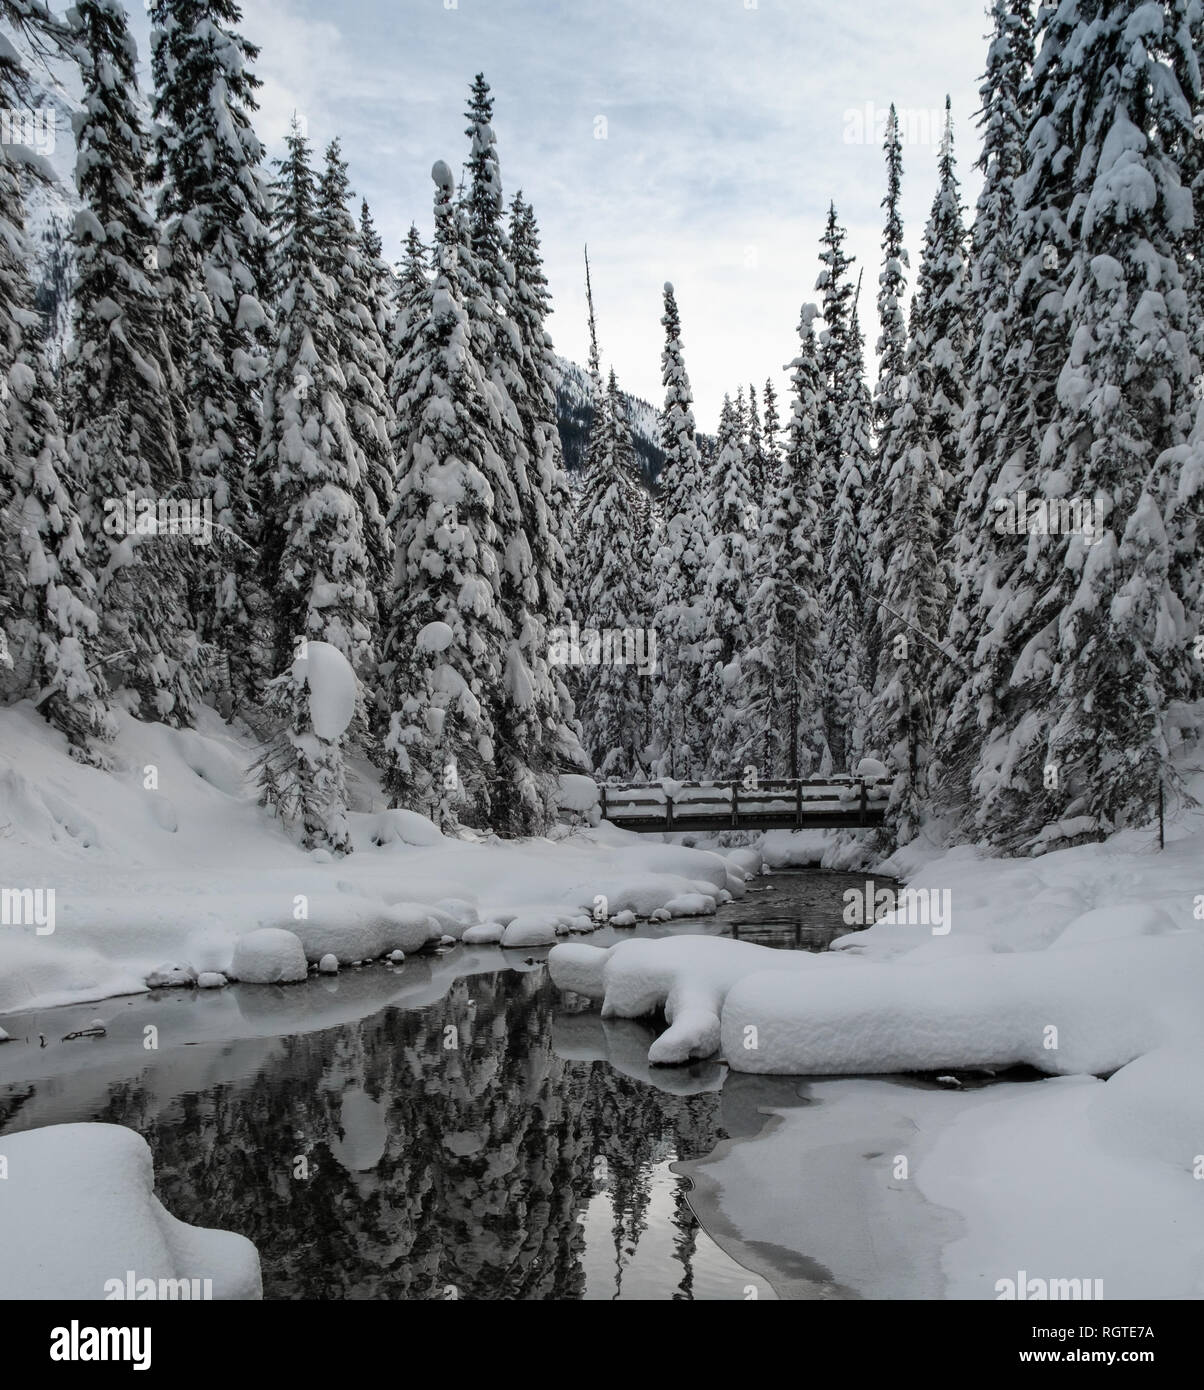 Stunning winter reflections of snow covered spruce trees in the waters of Emerald Lake, Yoho National Park, British Columbia, Canada Stock Photo